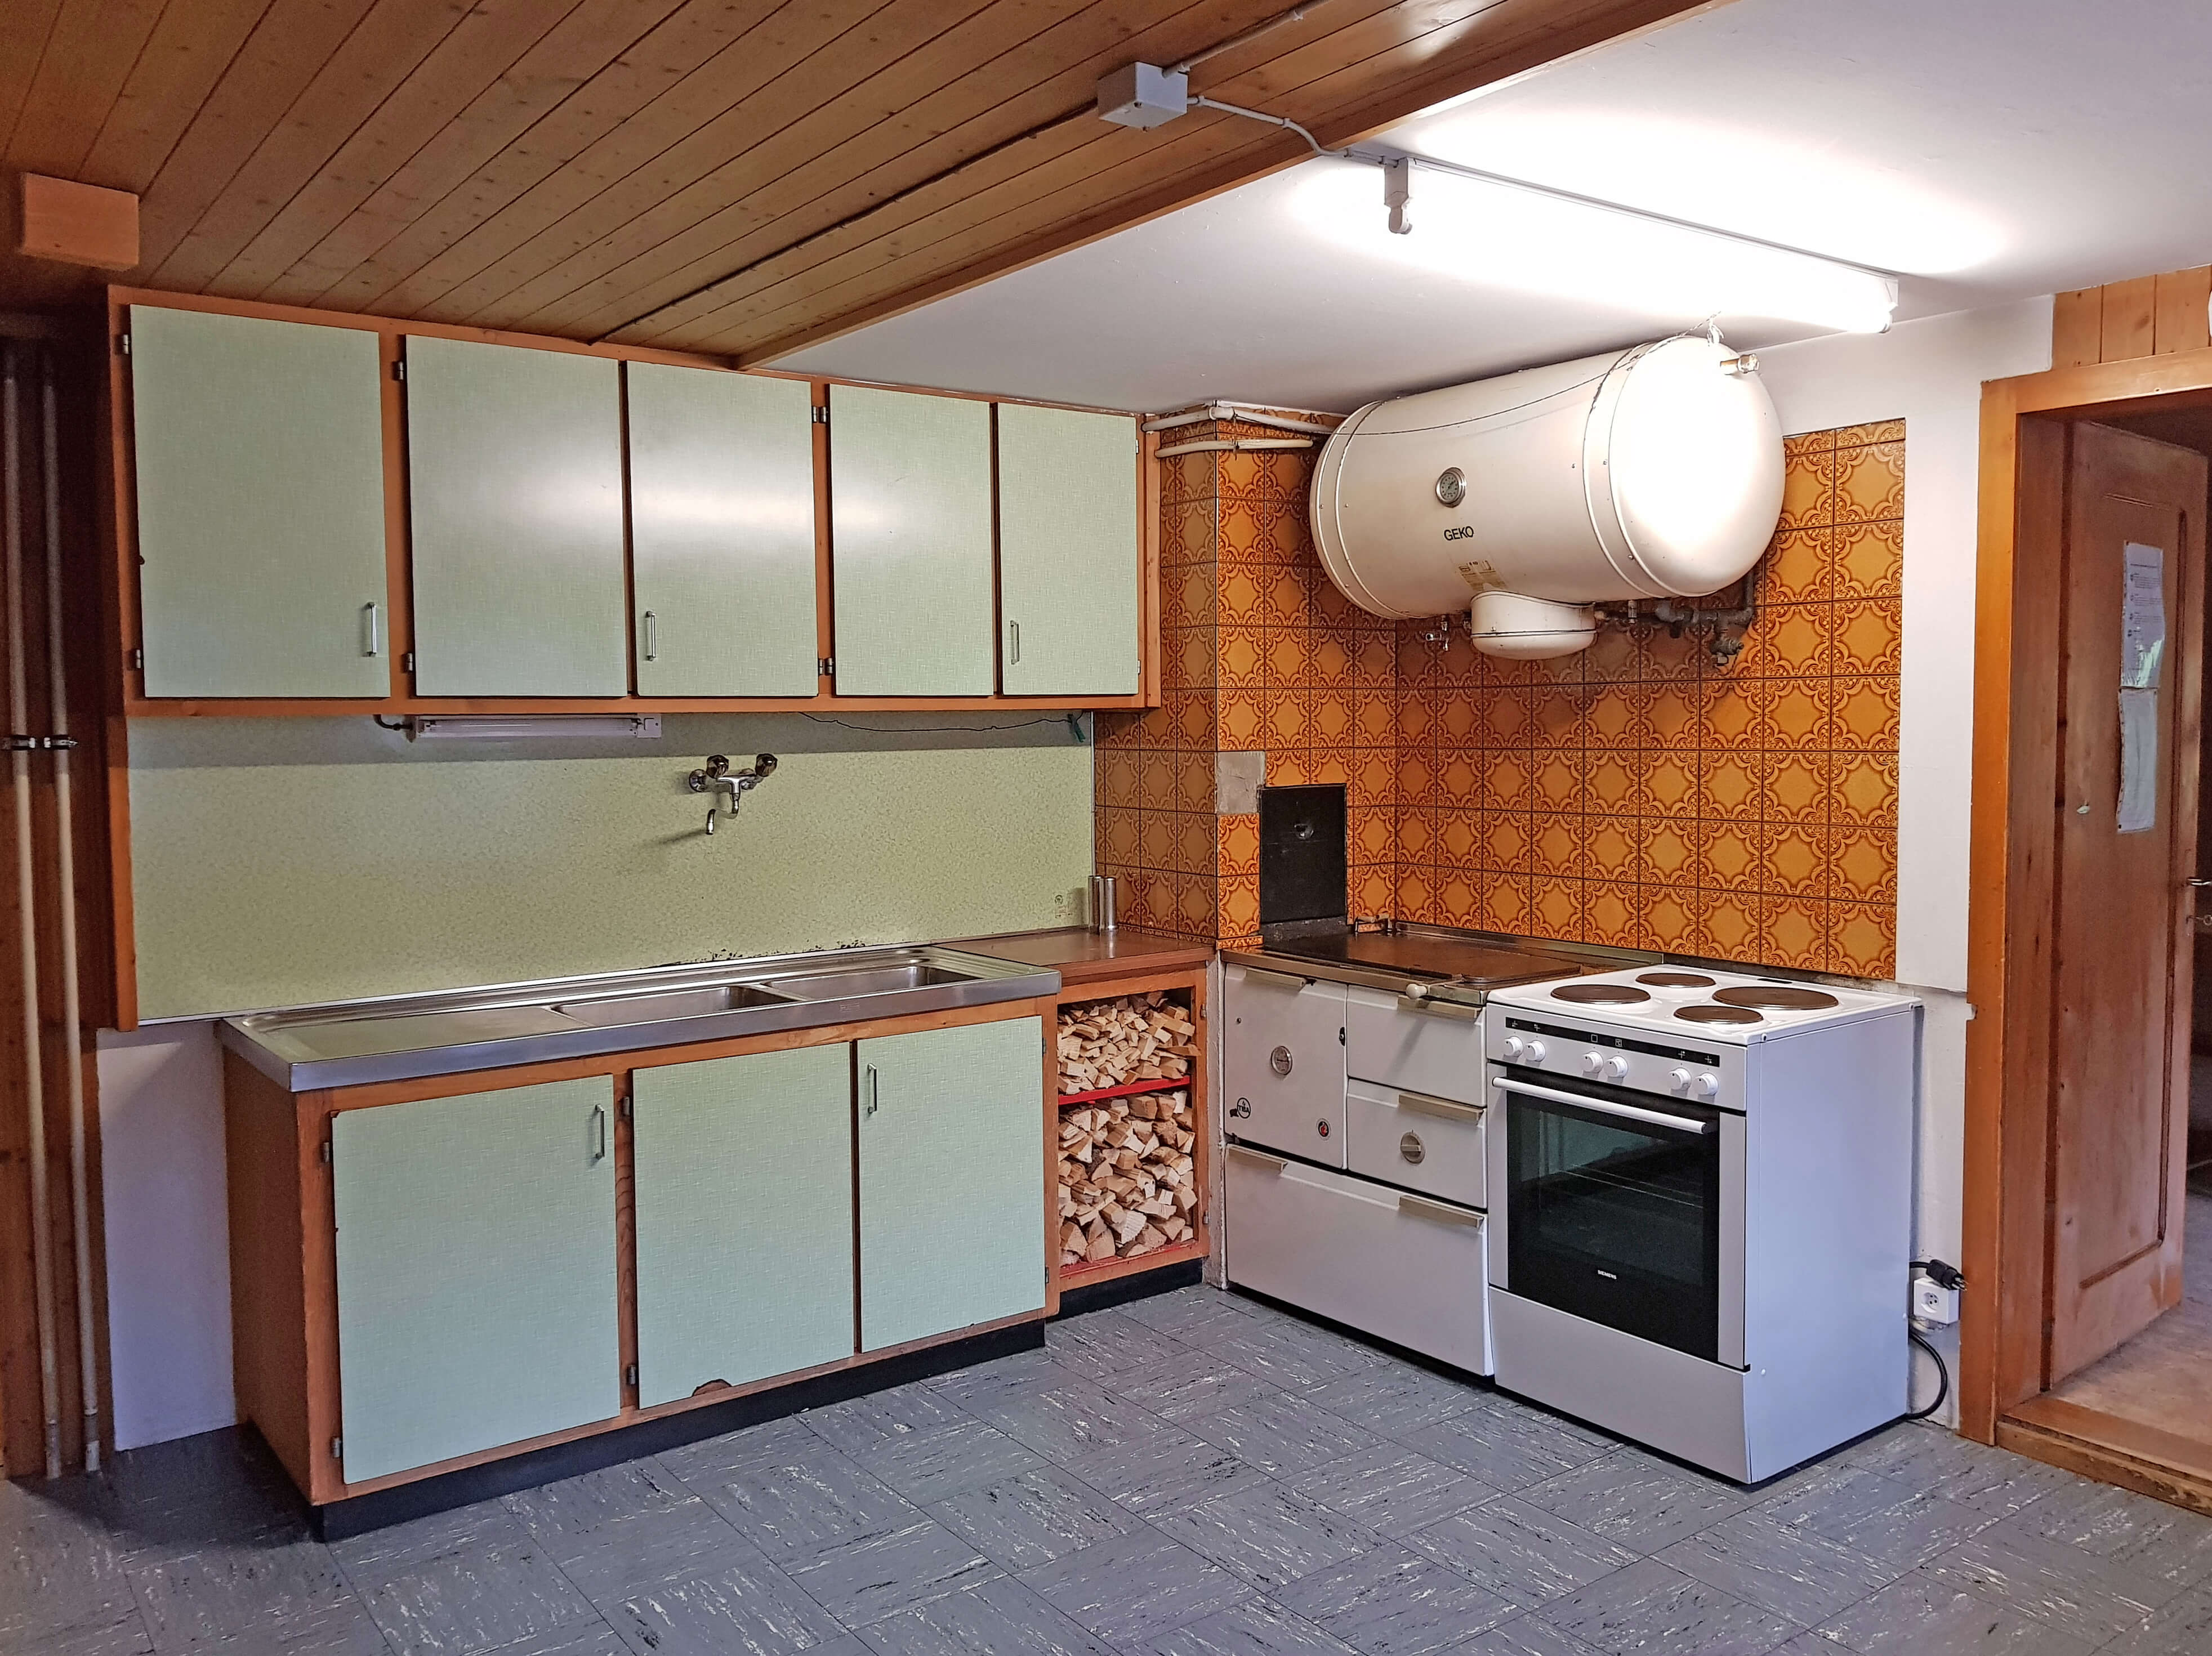 Kitchen with wood stove